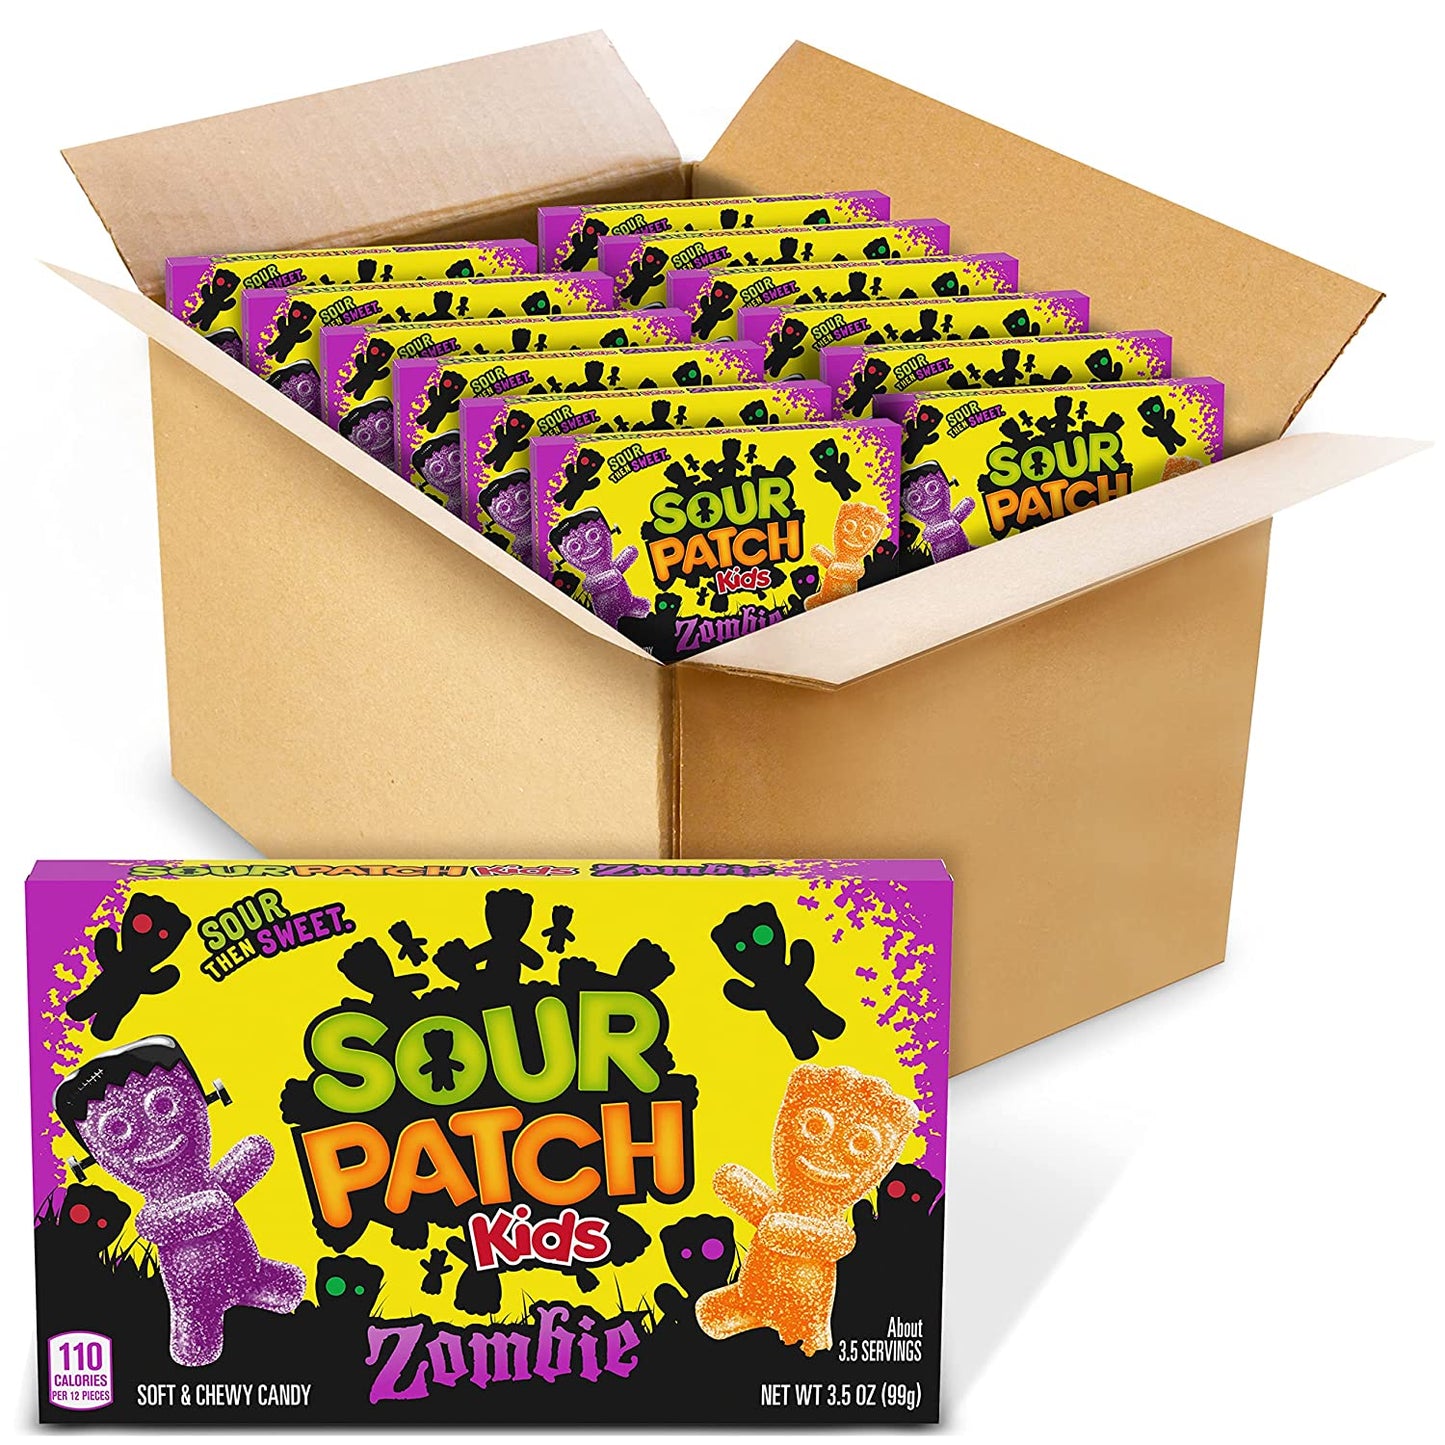 Sour Patch Kids Zombies Halloween Gummy Candy Theater Box - 12 Pack